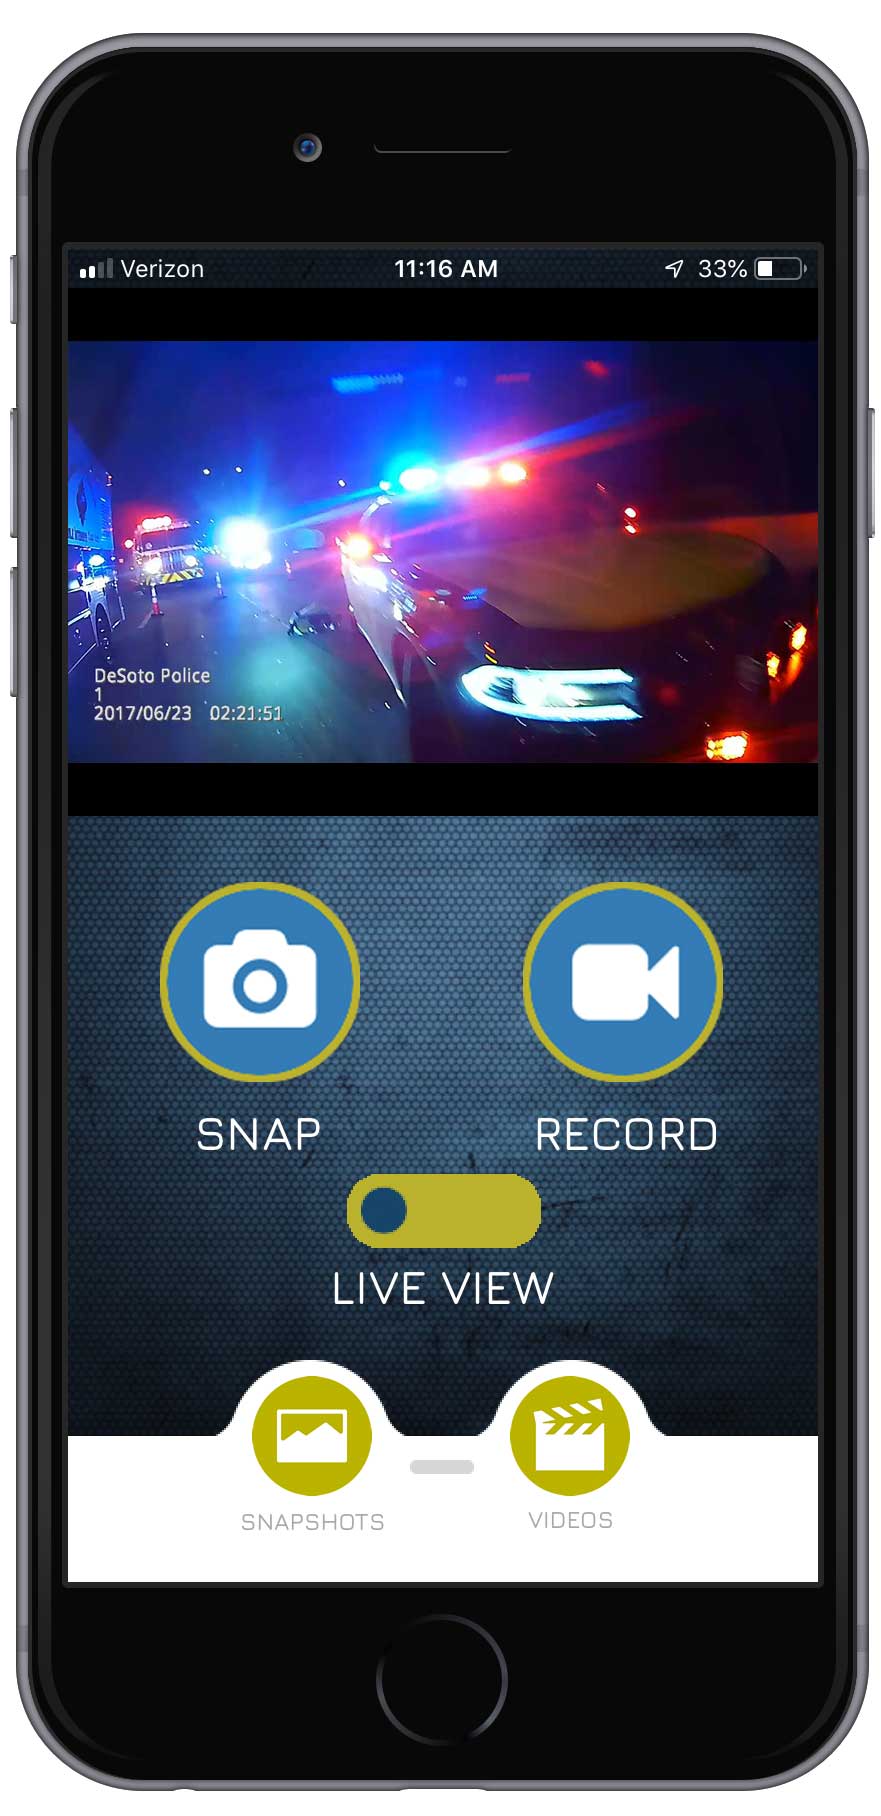 Camera controller on custom developed law enforcement body cam control application for mobile phones.